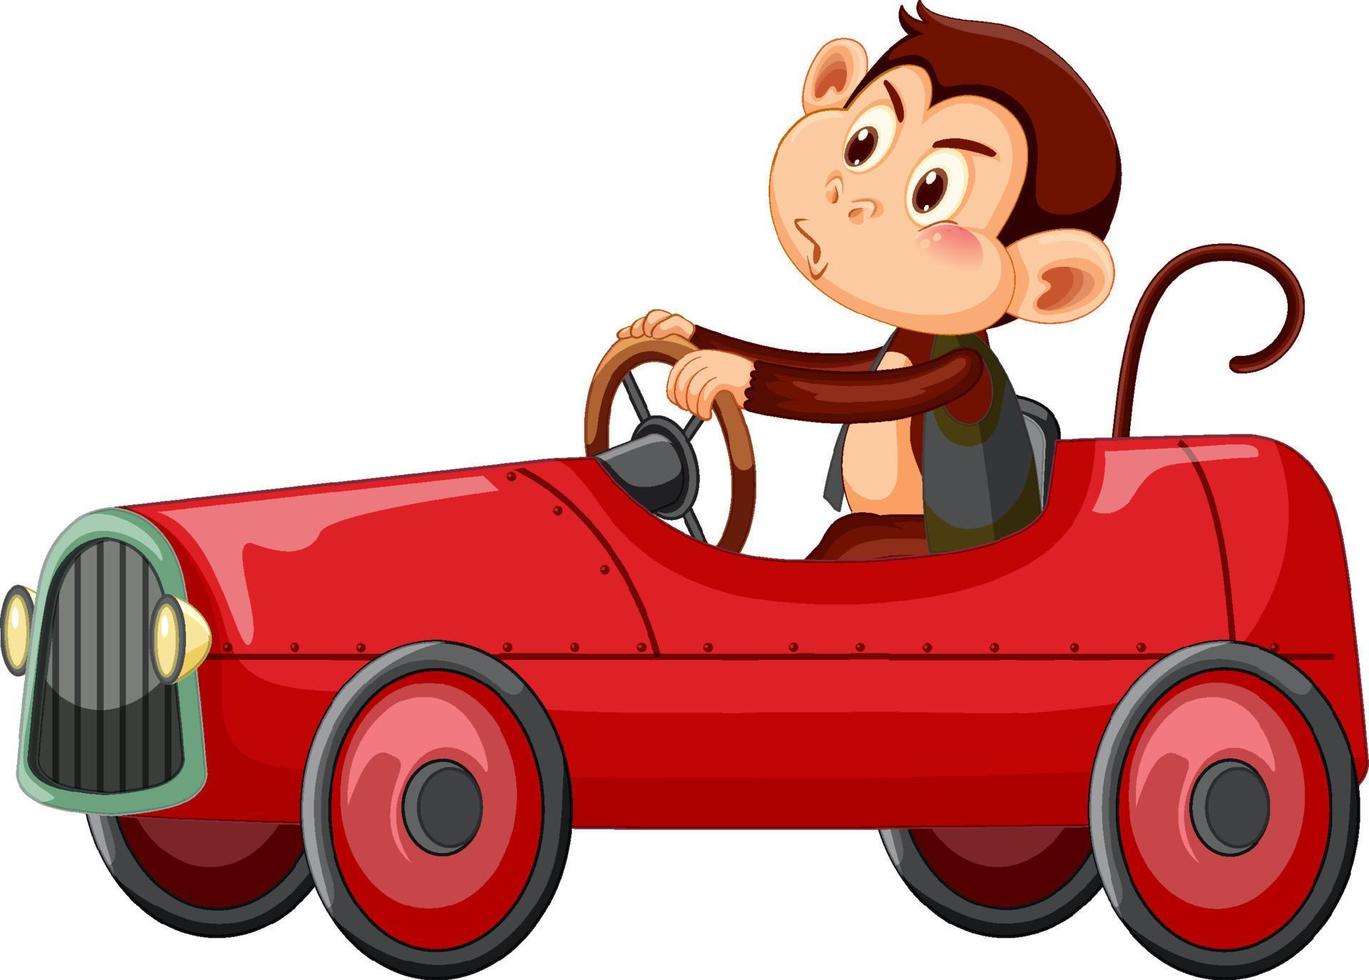 Little monkey driving red race car on white background vector